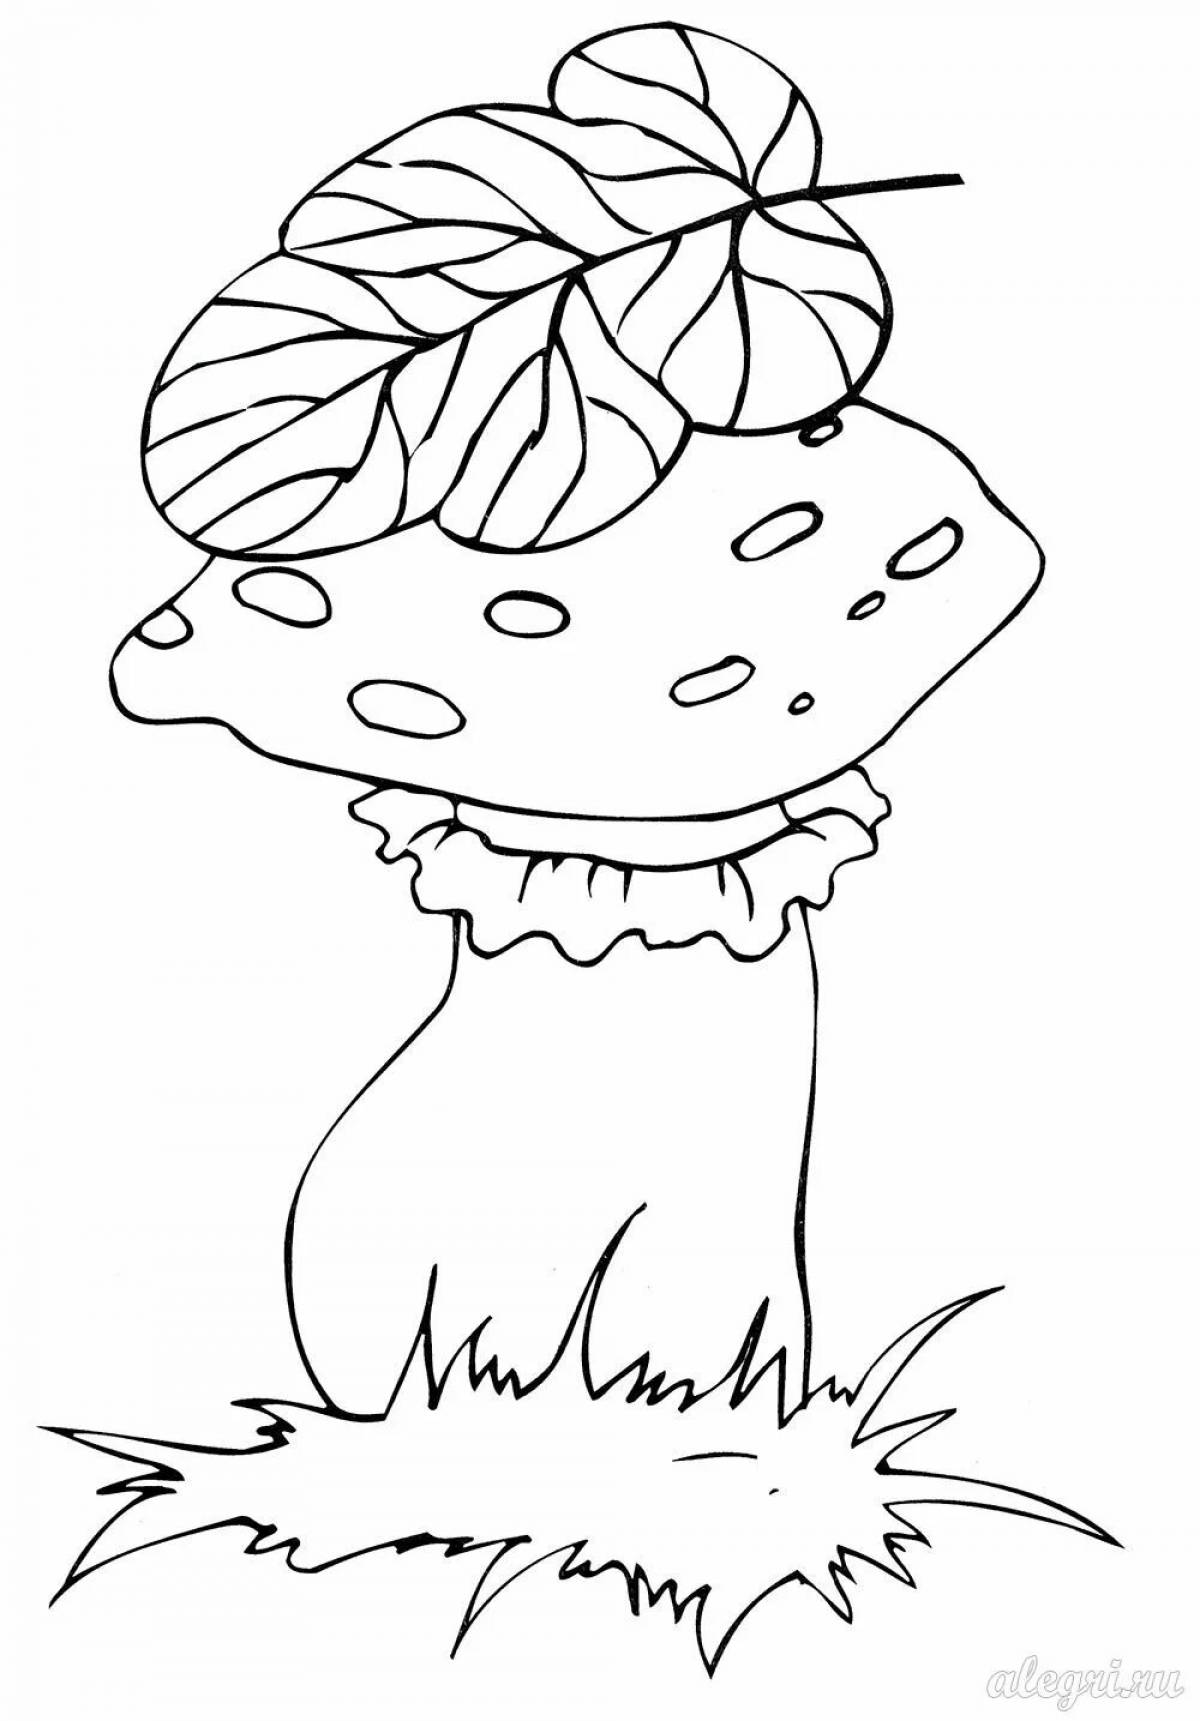 Color-explosion autumn coloring page for children 3-4 years old